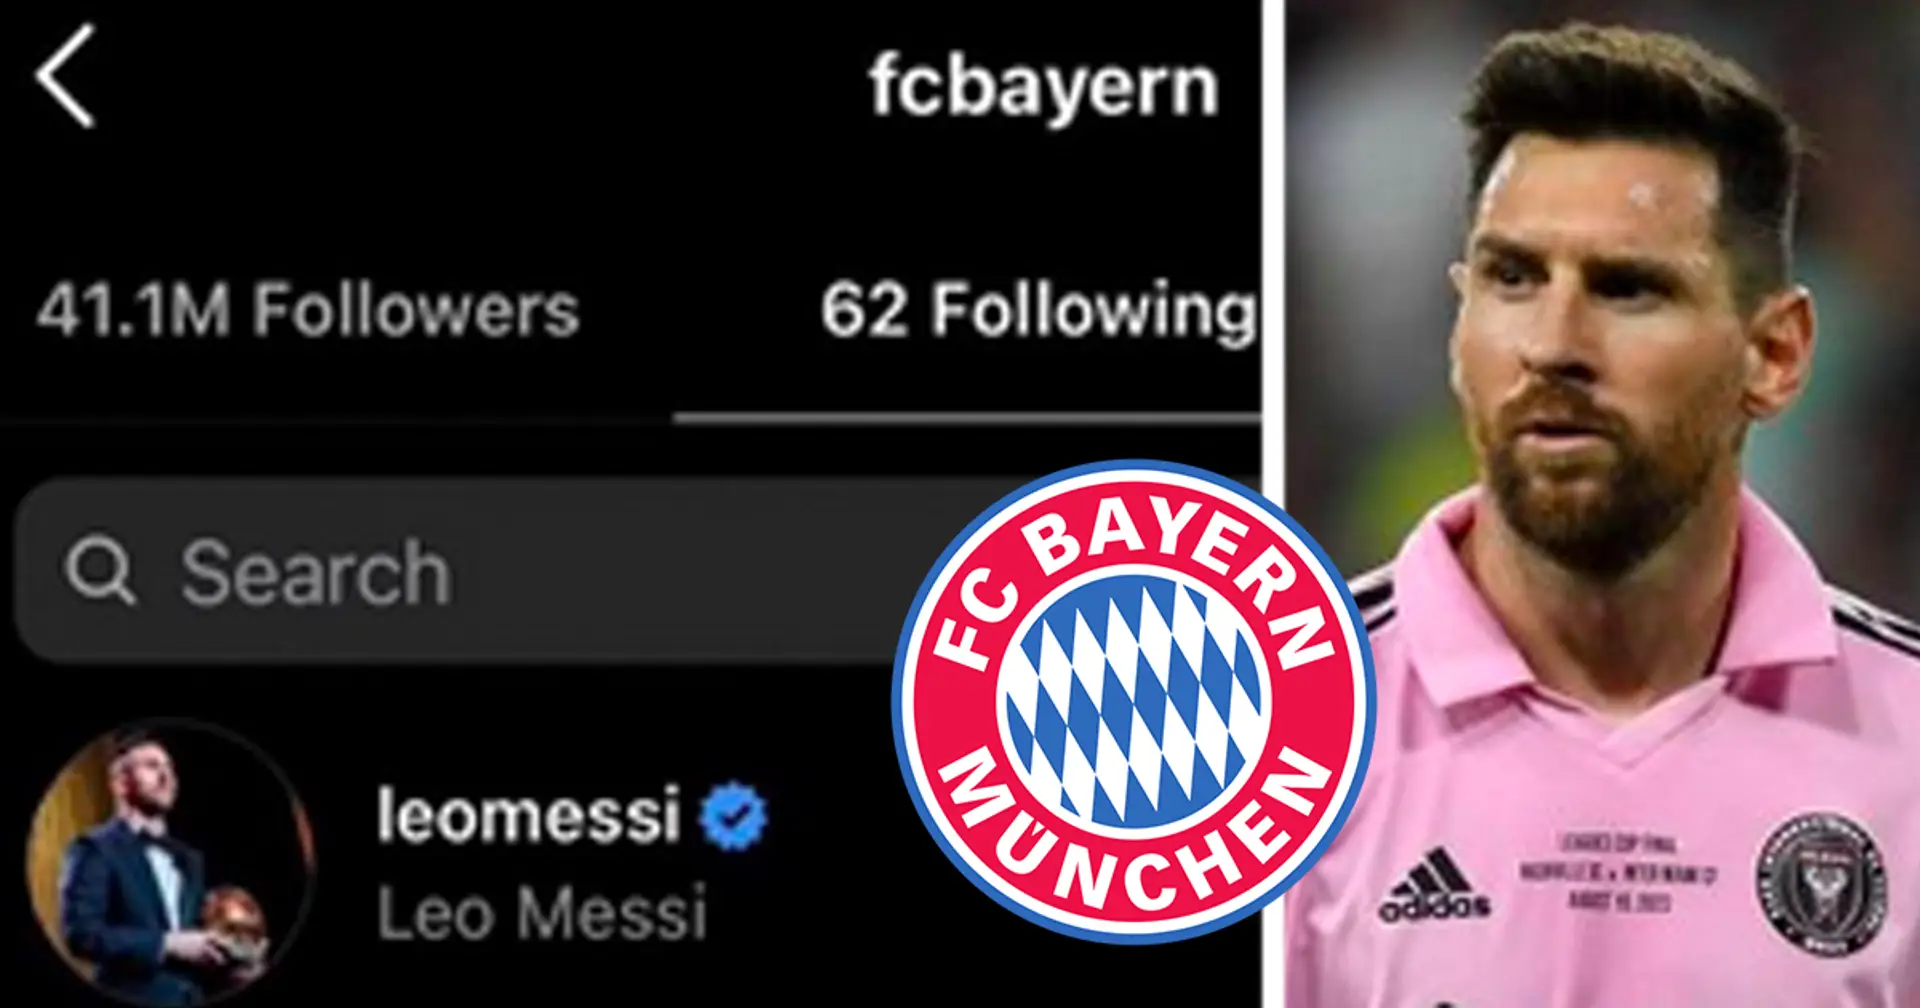 Leo Messi becomes first player followed by Bayern that never played for  them - Football | Tribuna.com